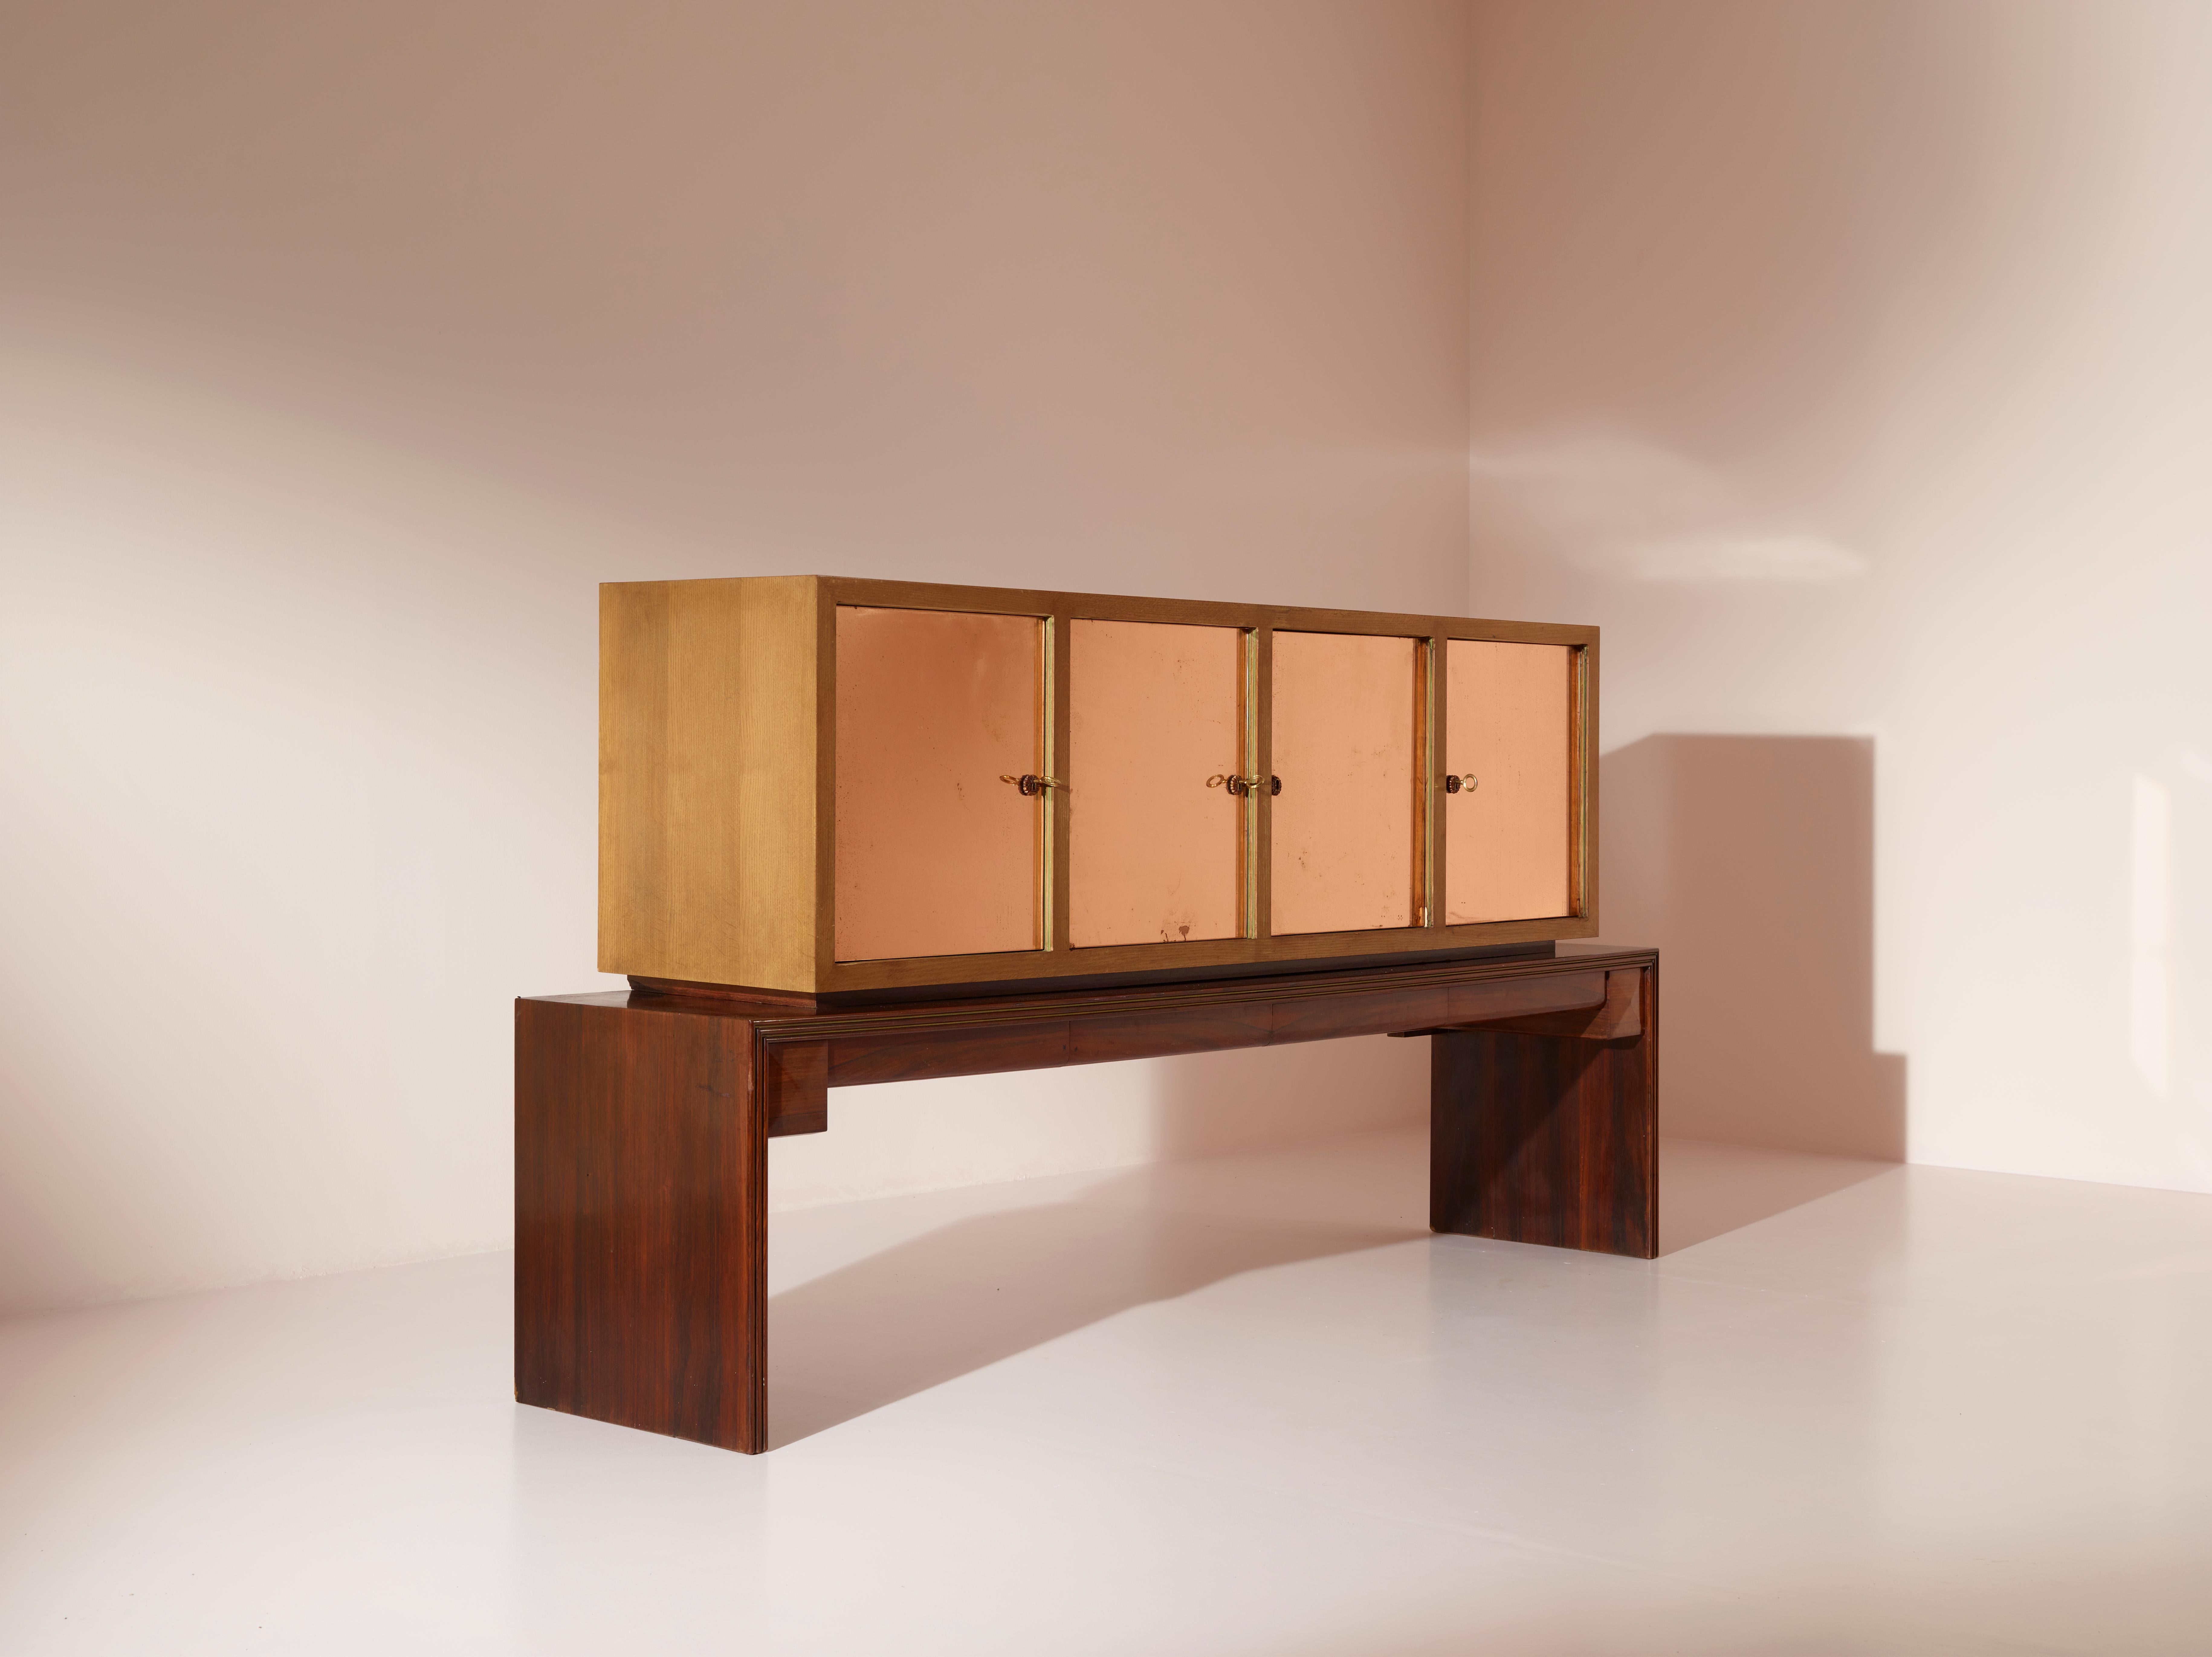 This sideboard cabinet, crafted in the 1960s by Alberto Salvati and Ambrogio Tresoldi, is a prime example of how neoclassical design principles were incorporated into midcentury Furniture. Produced in Lissone (Milan) for a private commission, this